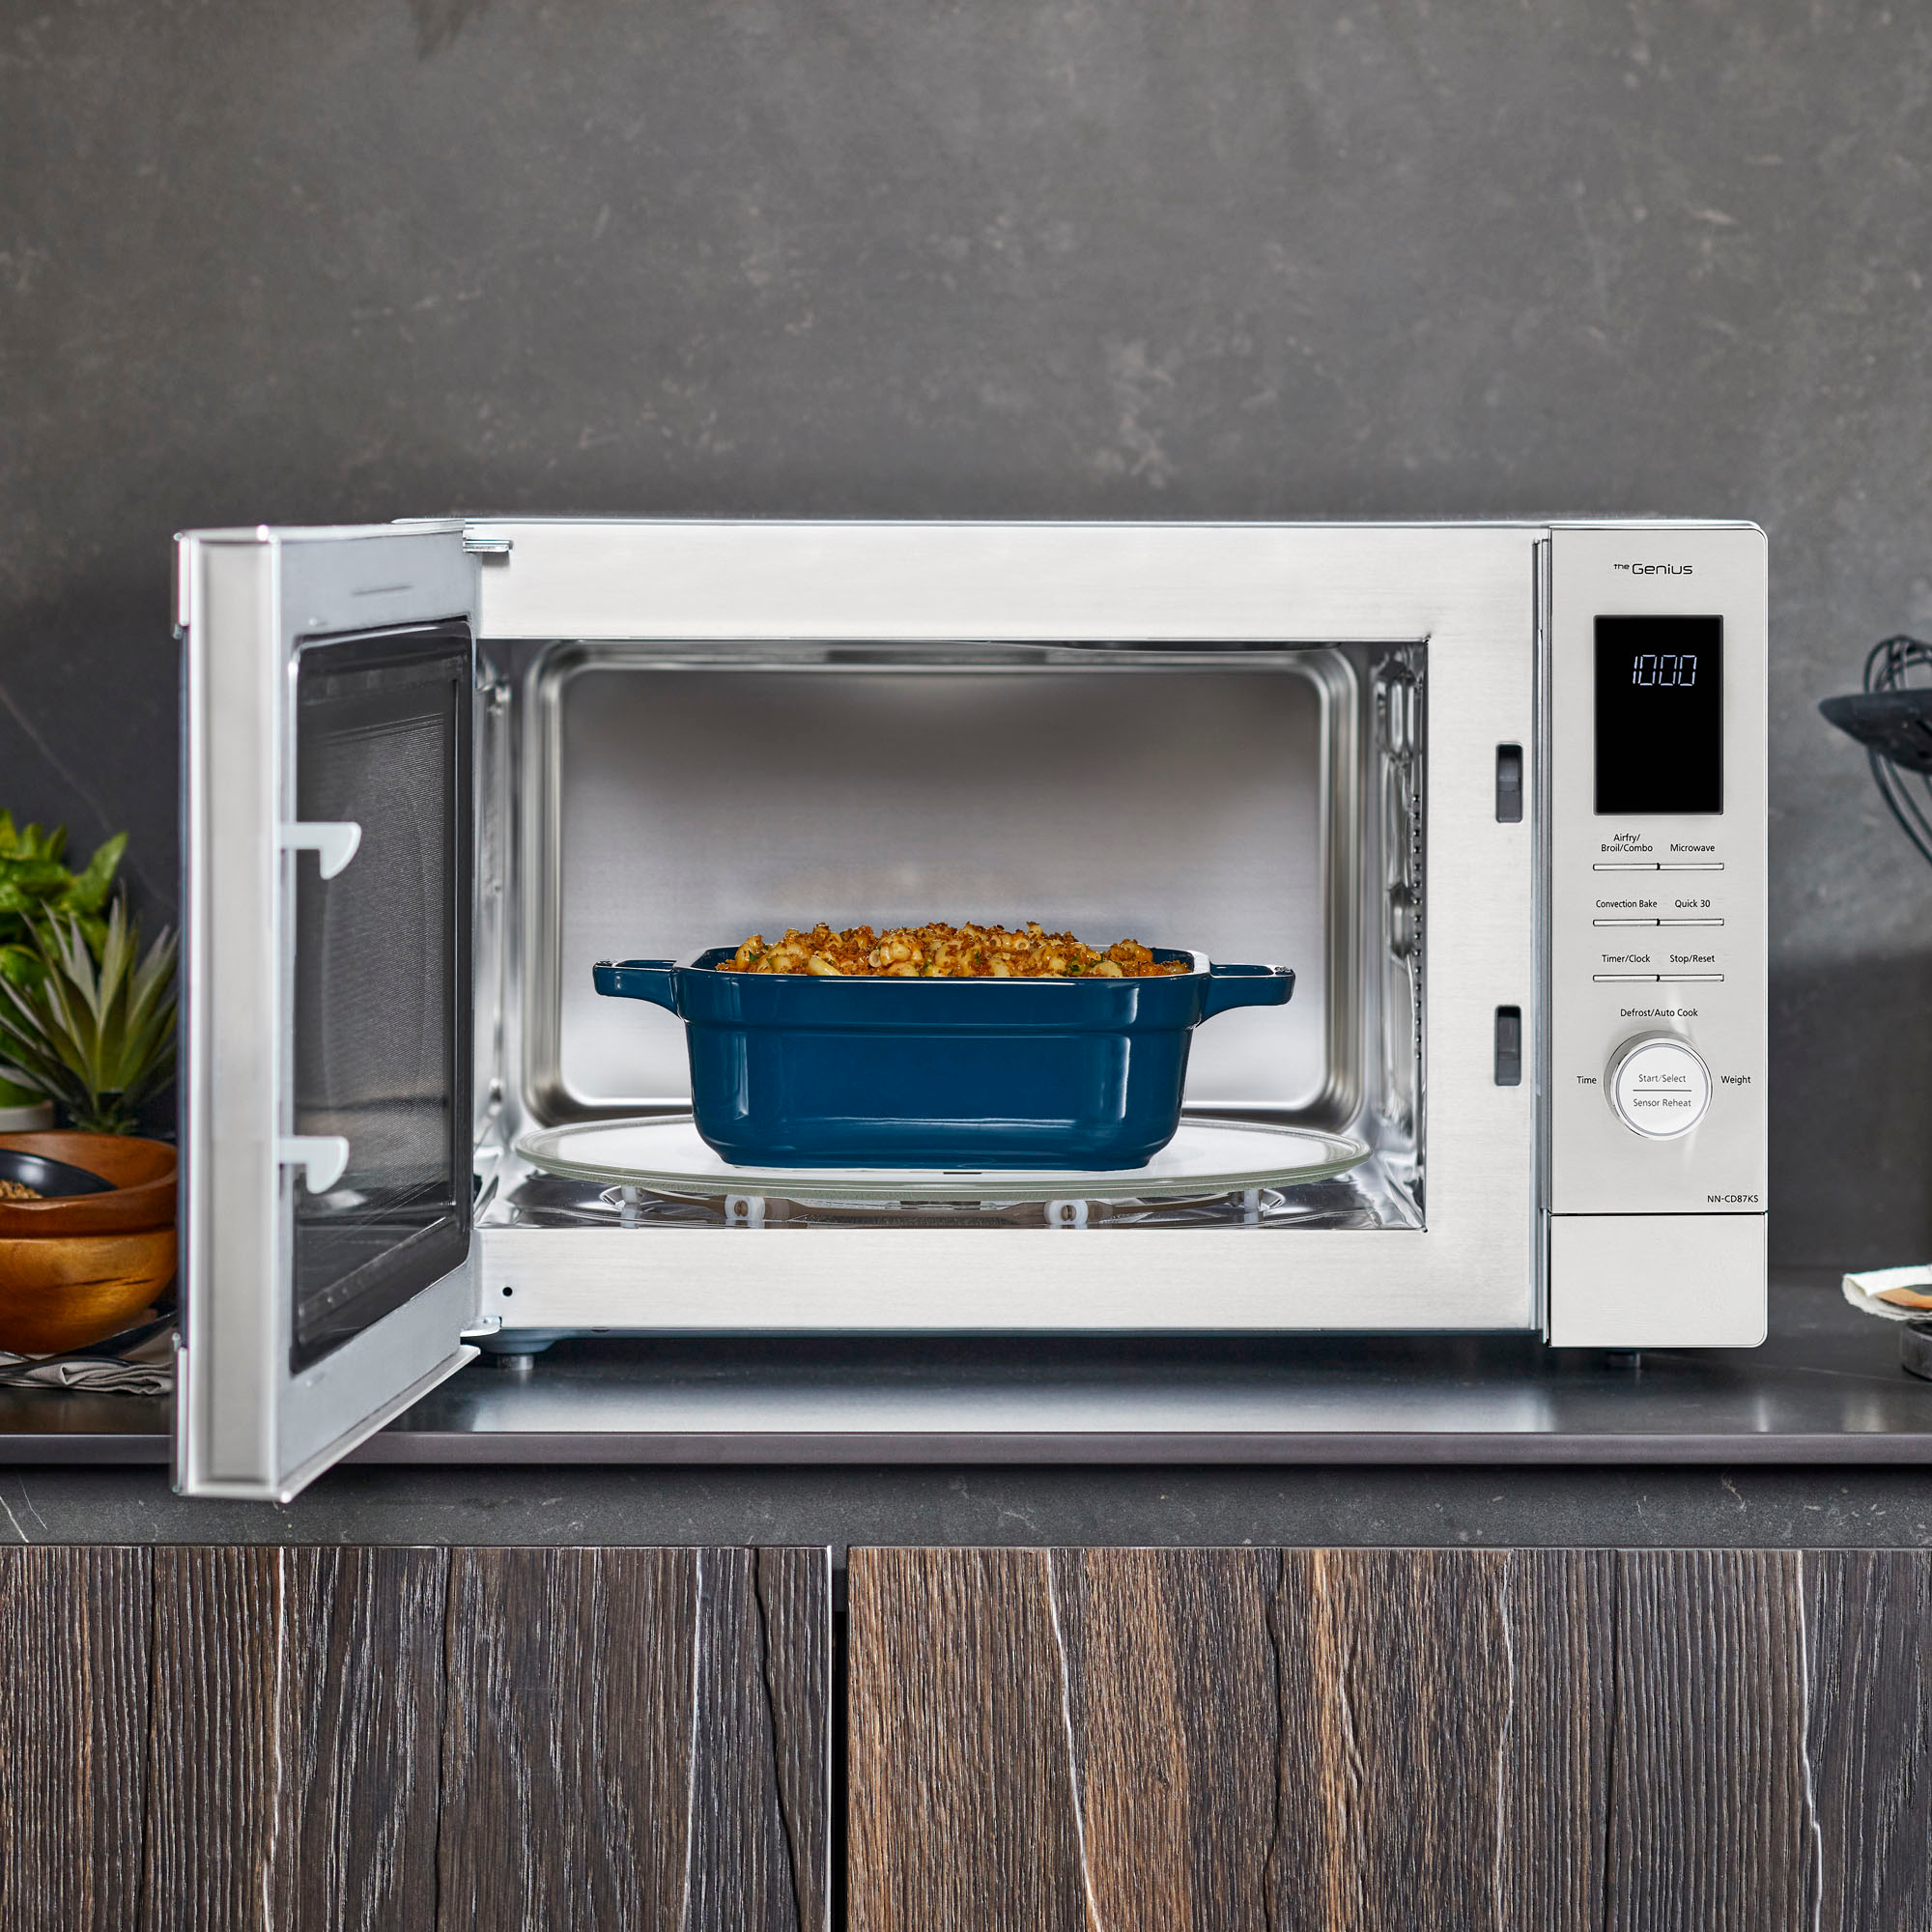 Panasonic Unveils World's First Countertop Induction Oven At International  Home & Housewares Show